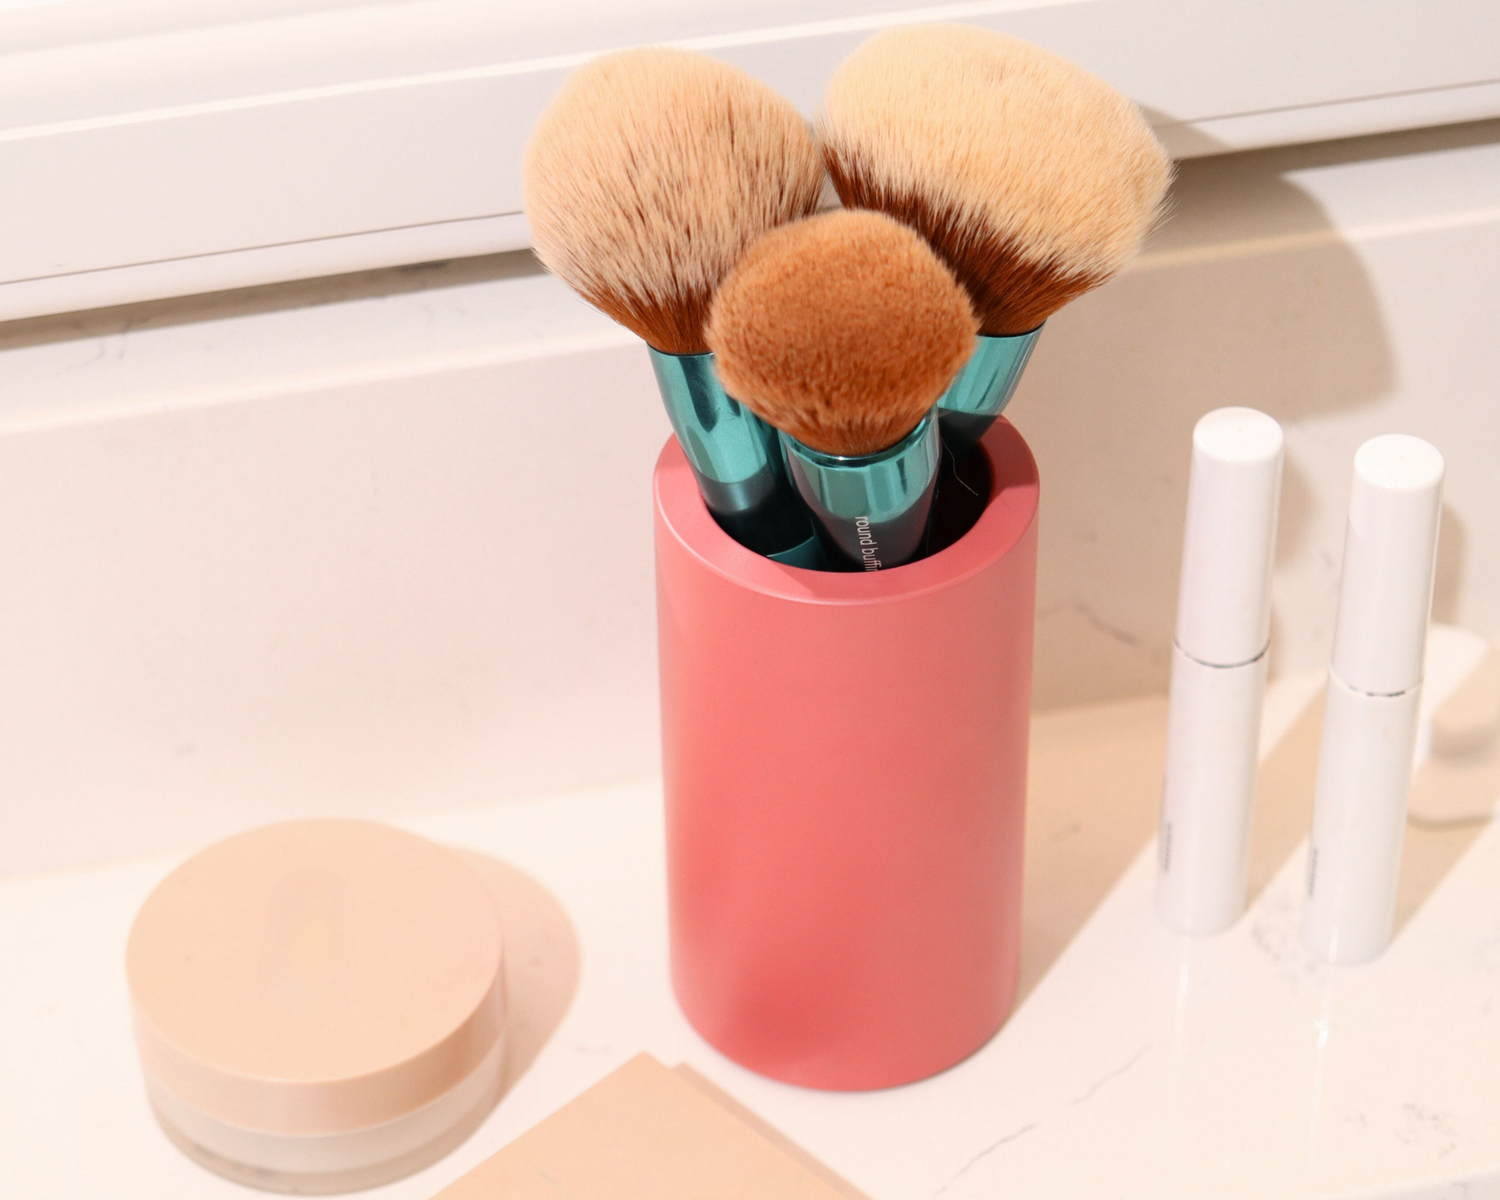 Why Bathroom Organizer for Cosmetic Brushes